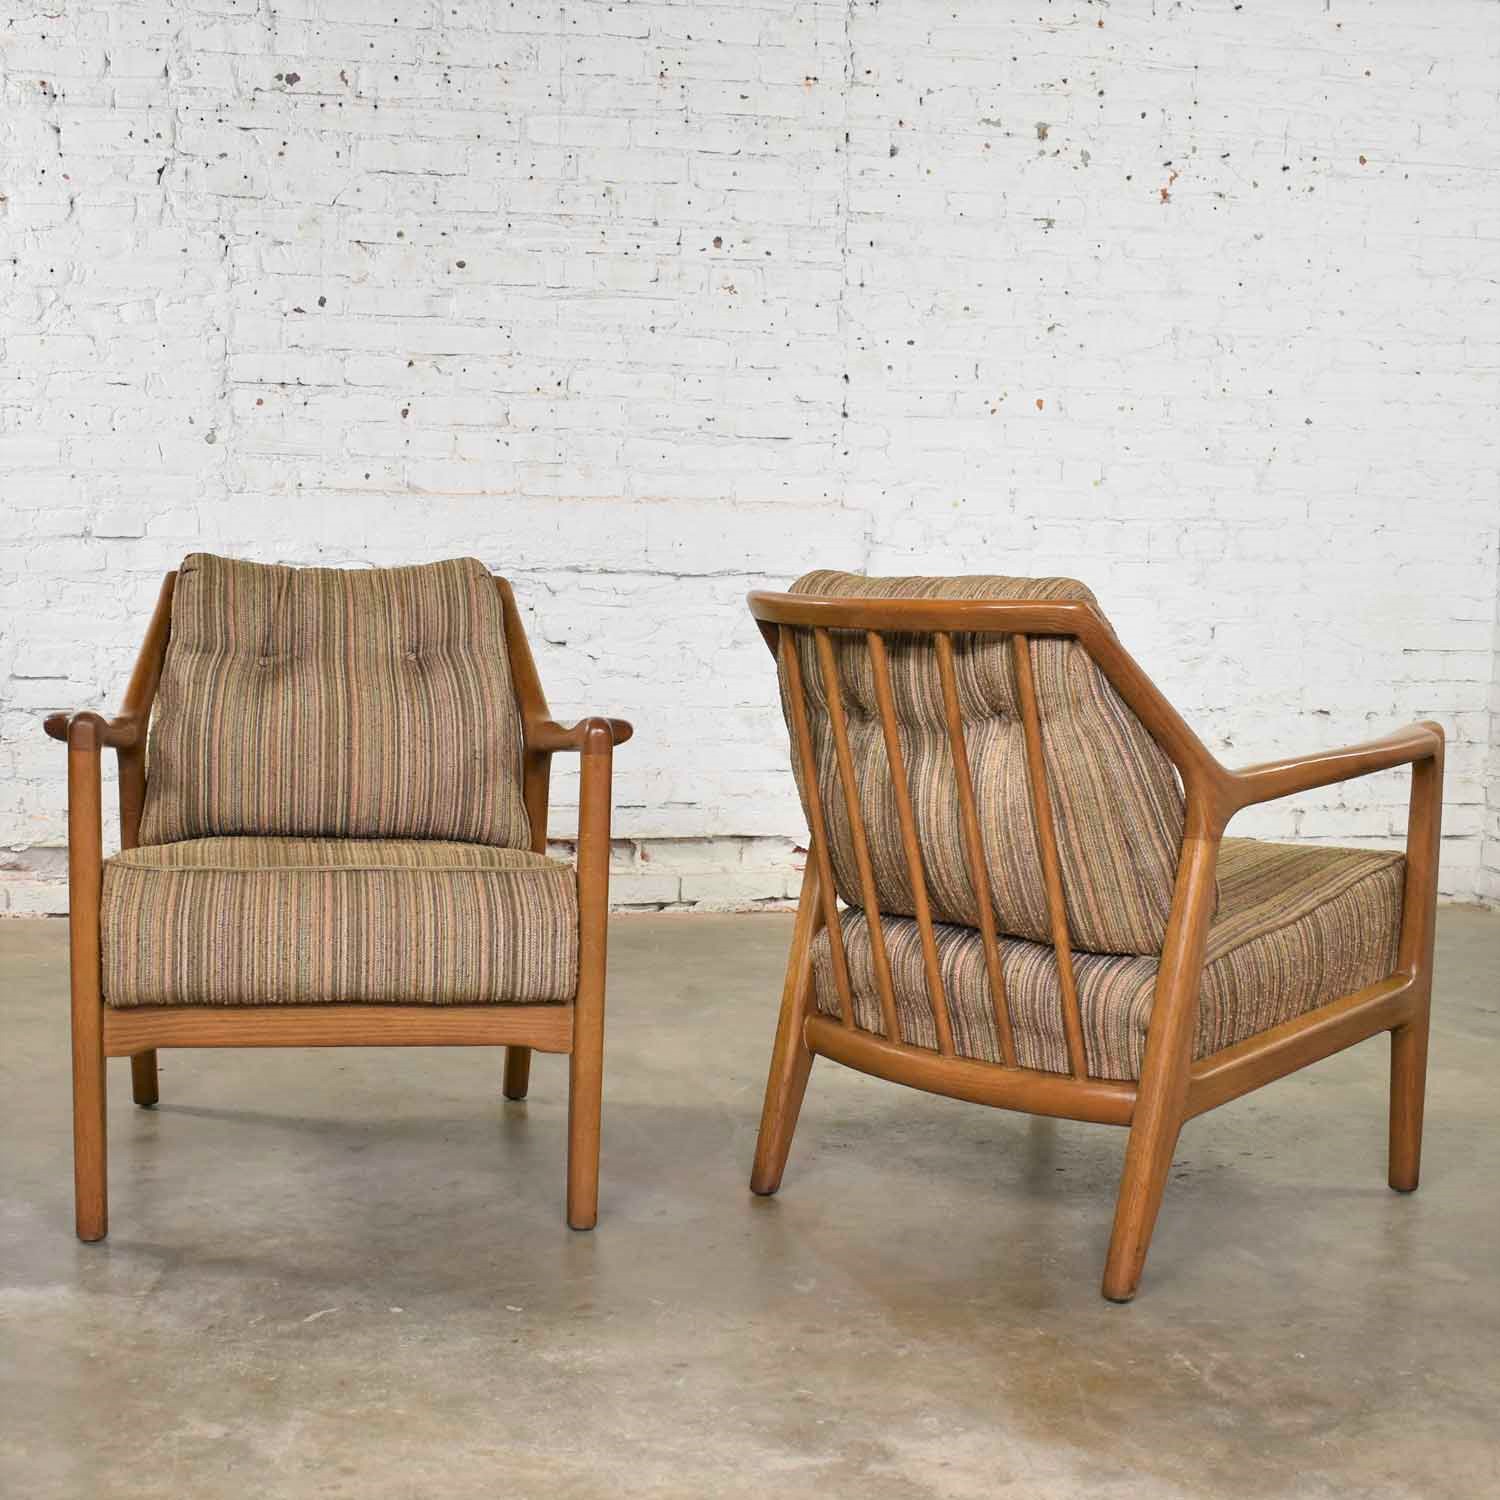 Pair of Ash Group Spindle Back Chairs by Jack Van Der Molen for Jamestown Lounge Co.